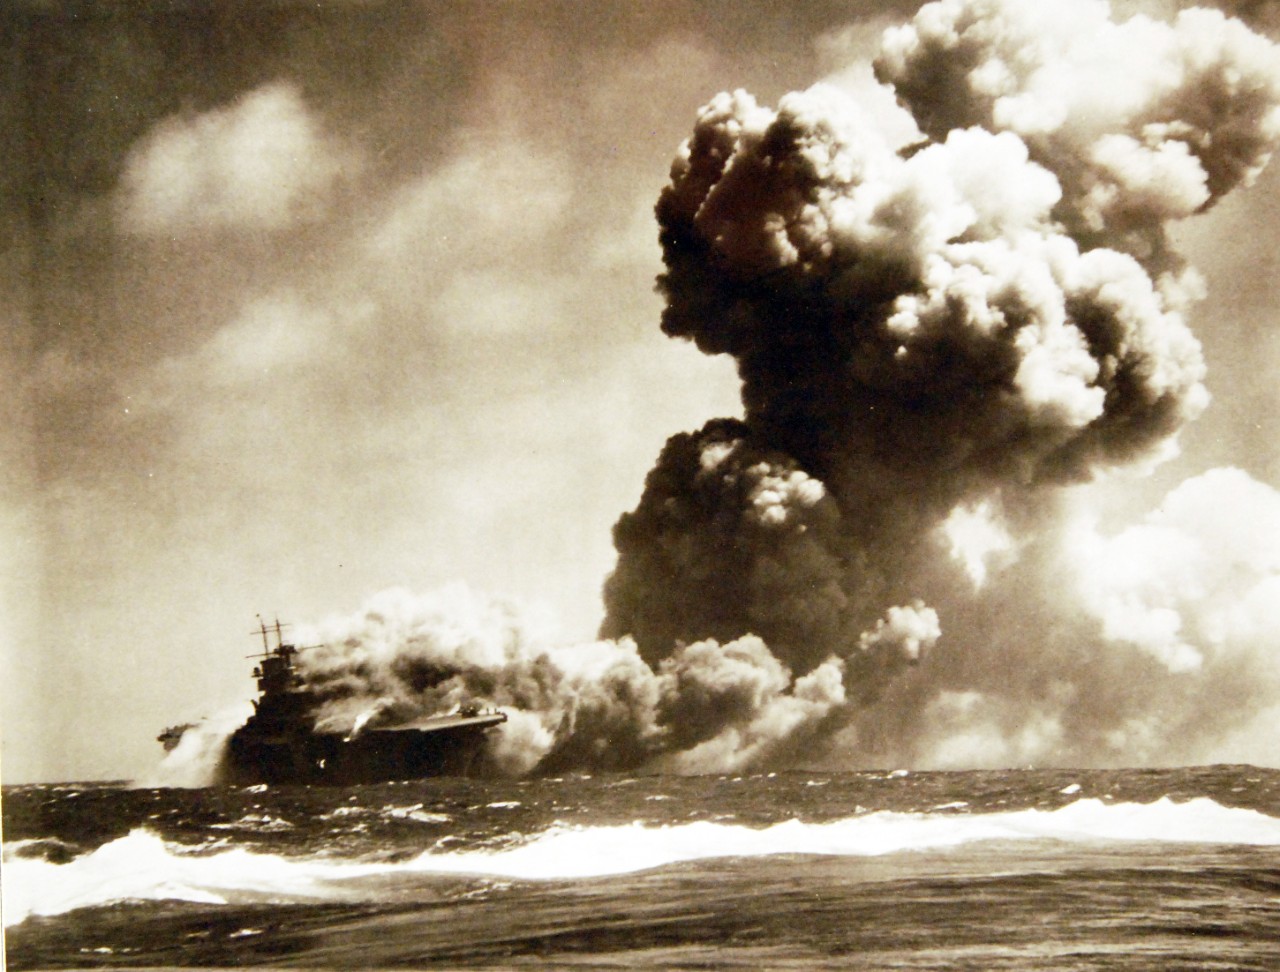 80-G-425072: Loss of USS Wasp (CV-7), 15 September 1942.    USS Wasp (CV-7) Burning and listing after she was torpedoed by the Japanese submarine I-19, on 15 September 1942, while operating in the Southwestern Pacific in support of forces on Guadalcanal.     Official U.S. Navy Photograph, now in the collections of the National Archives.   (2017/08/01).  